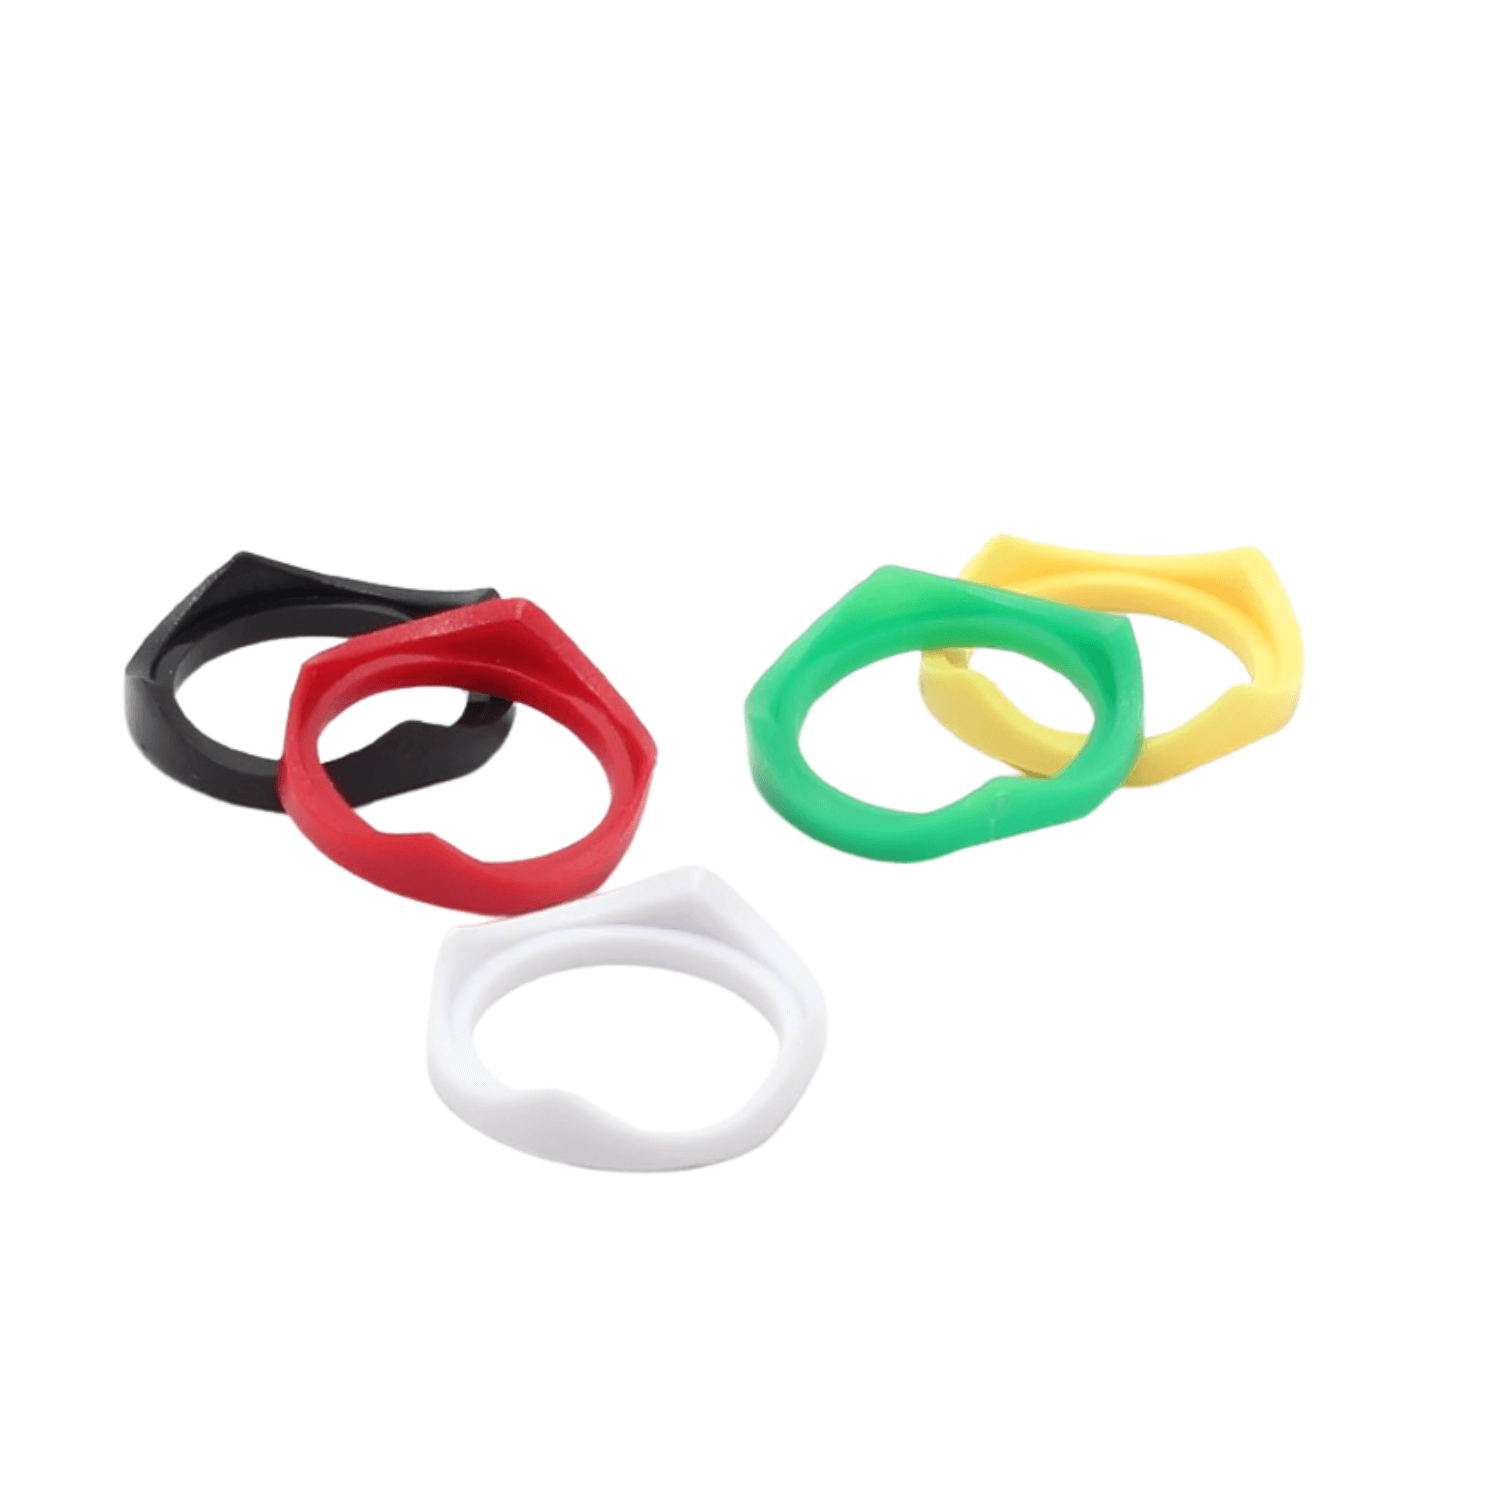 SXK MOBB 2 M2 Style Replacement Top Ring, [product_vandor]